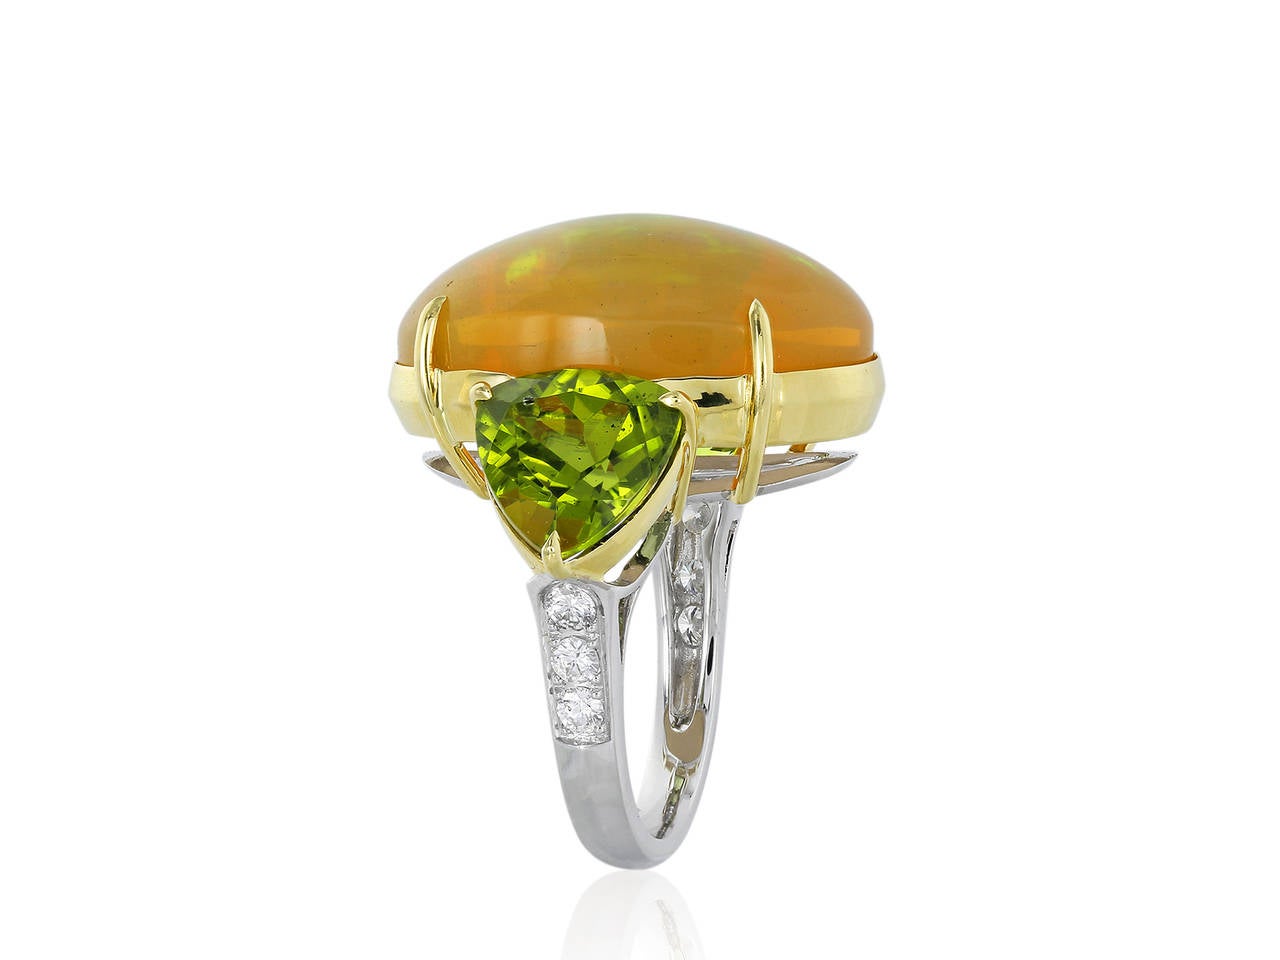 18 karat yellow gold 3 stone ring consisting of 1 cabochon oval shape fire Opal weighing approximately 17.18 carats, the center stone is flanked by trillion cut peridot side stone and 3 full cut diamonds on each side.